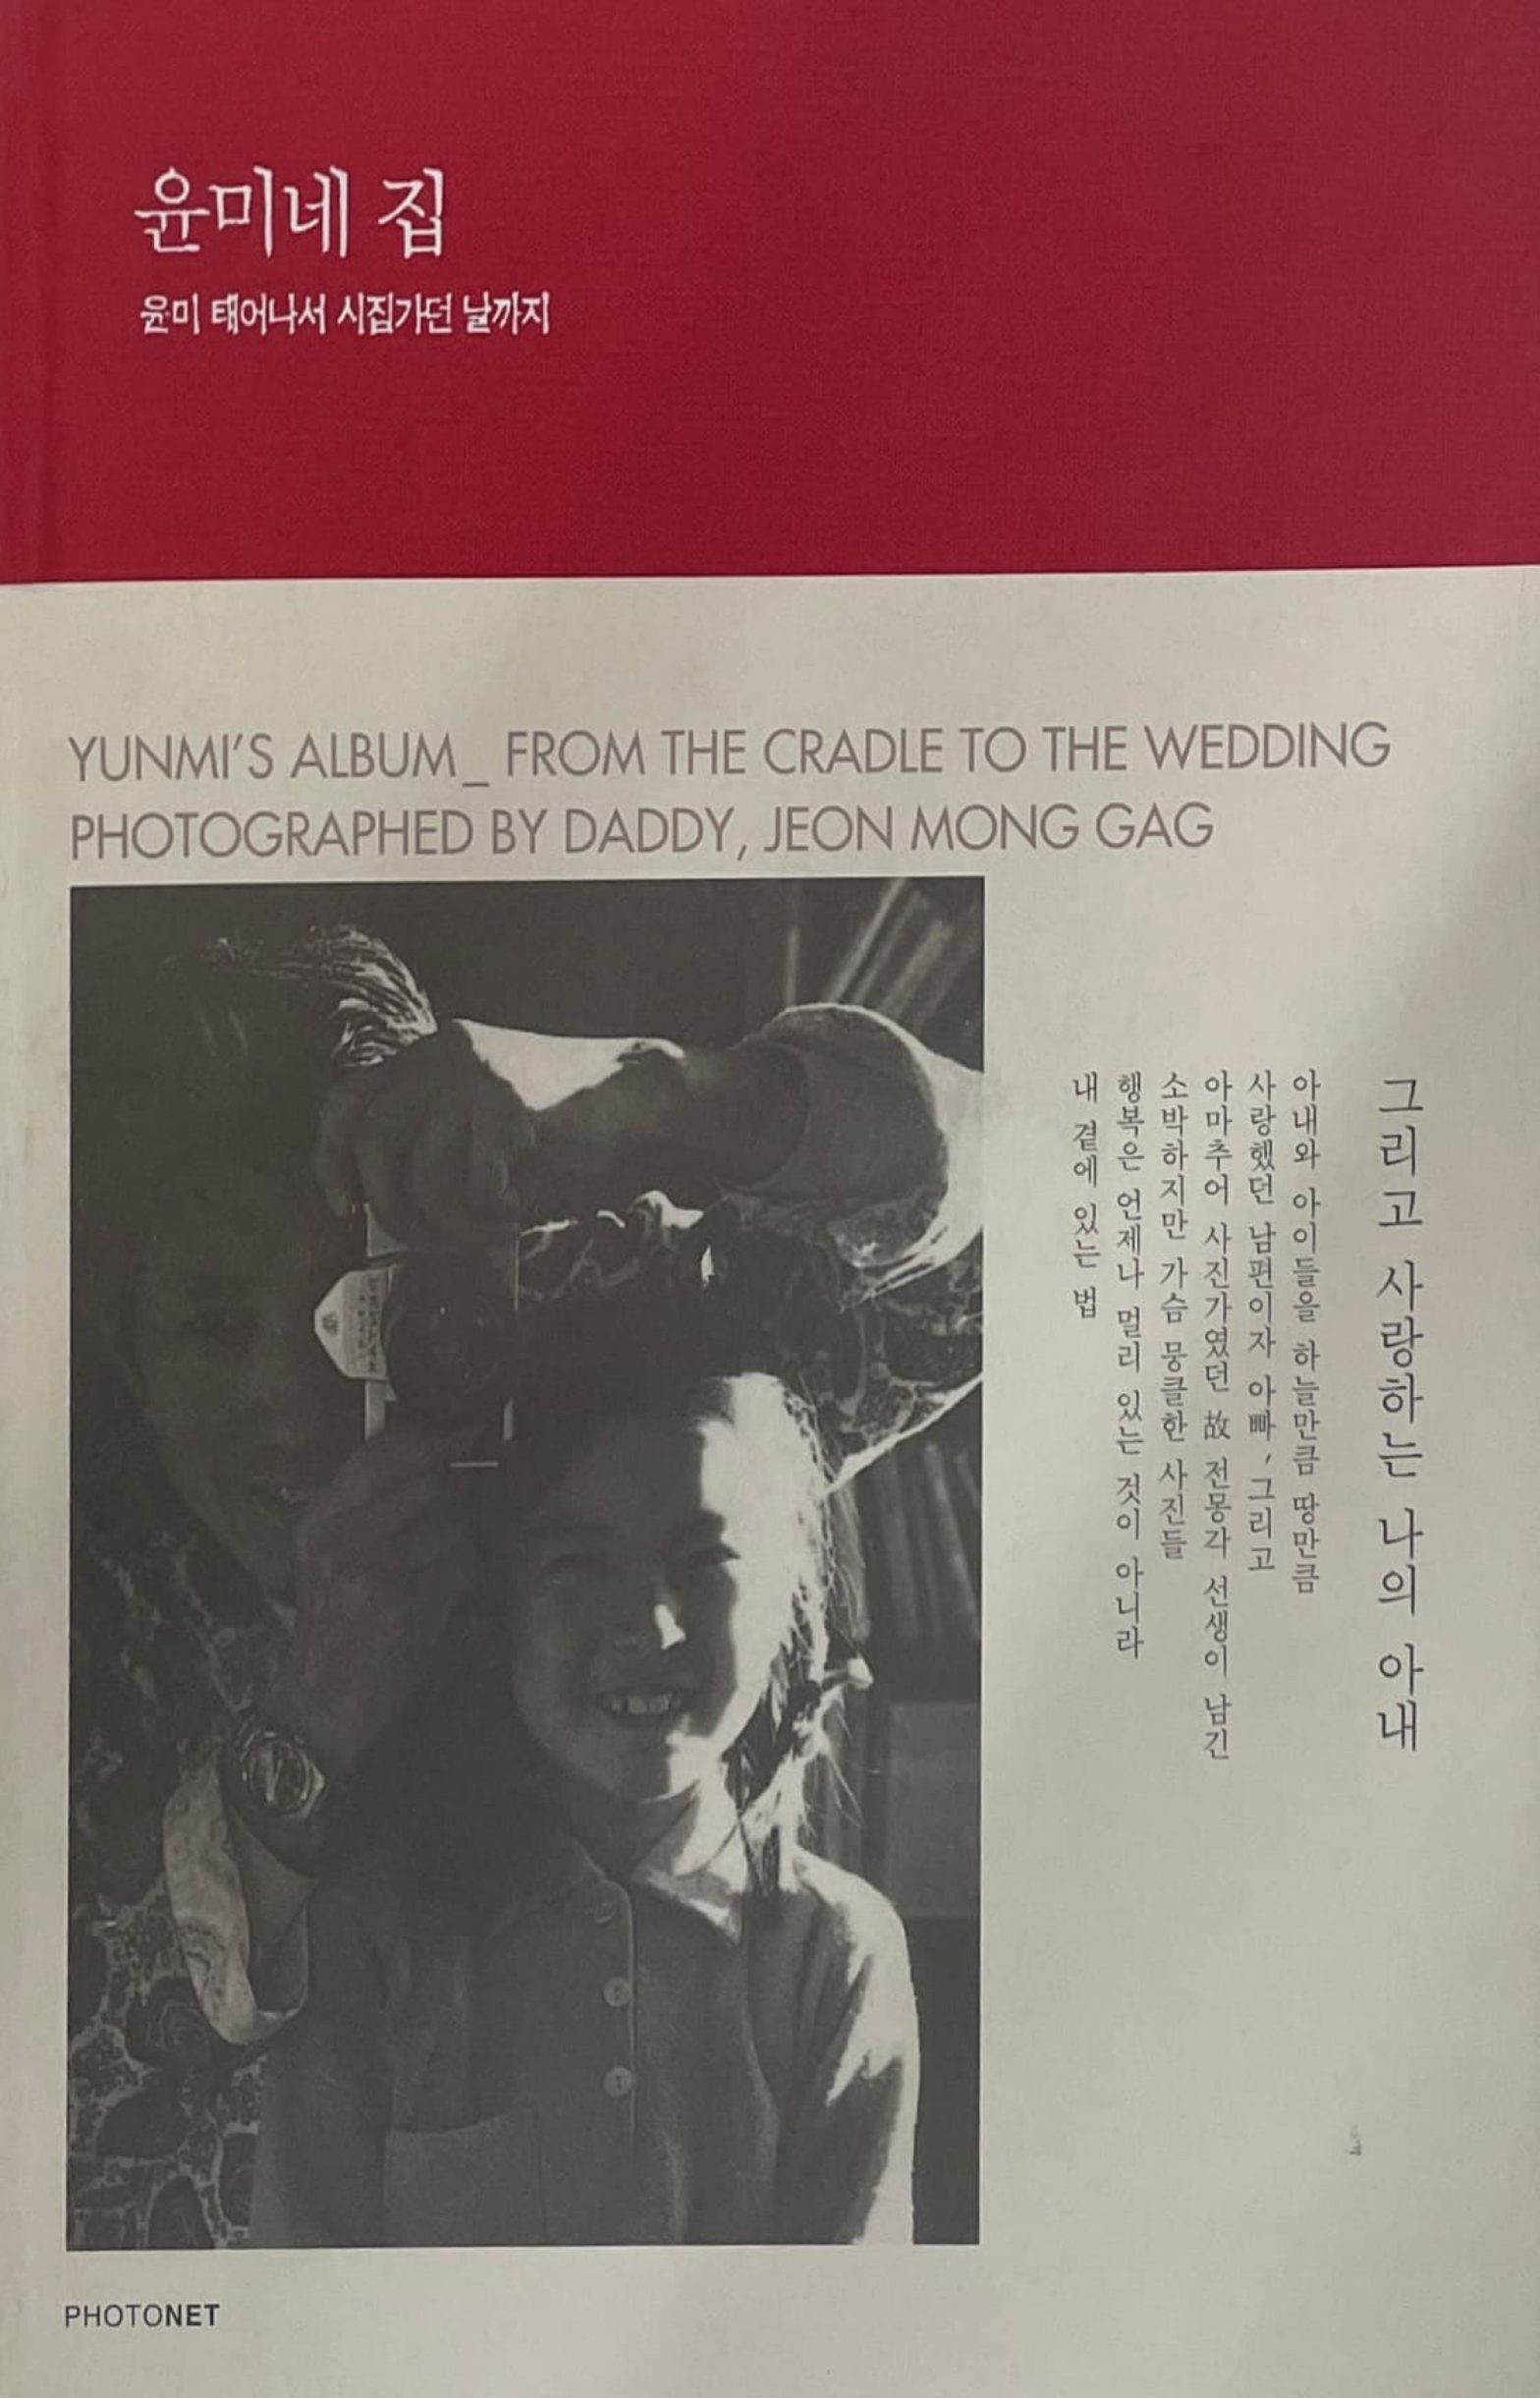 Yunmi's Album - From the Cradle to the Wedding, Jeon Mong Gag